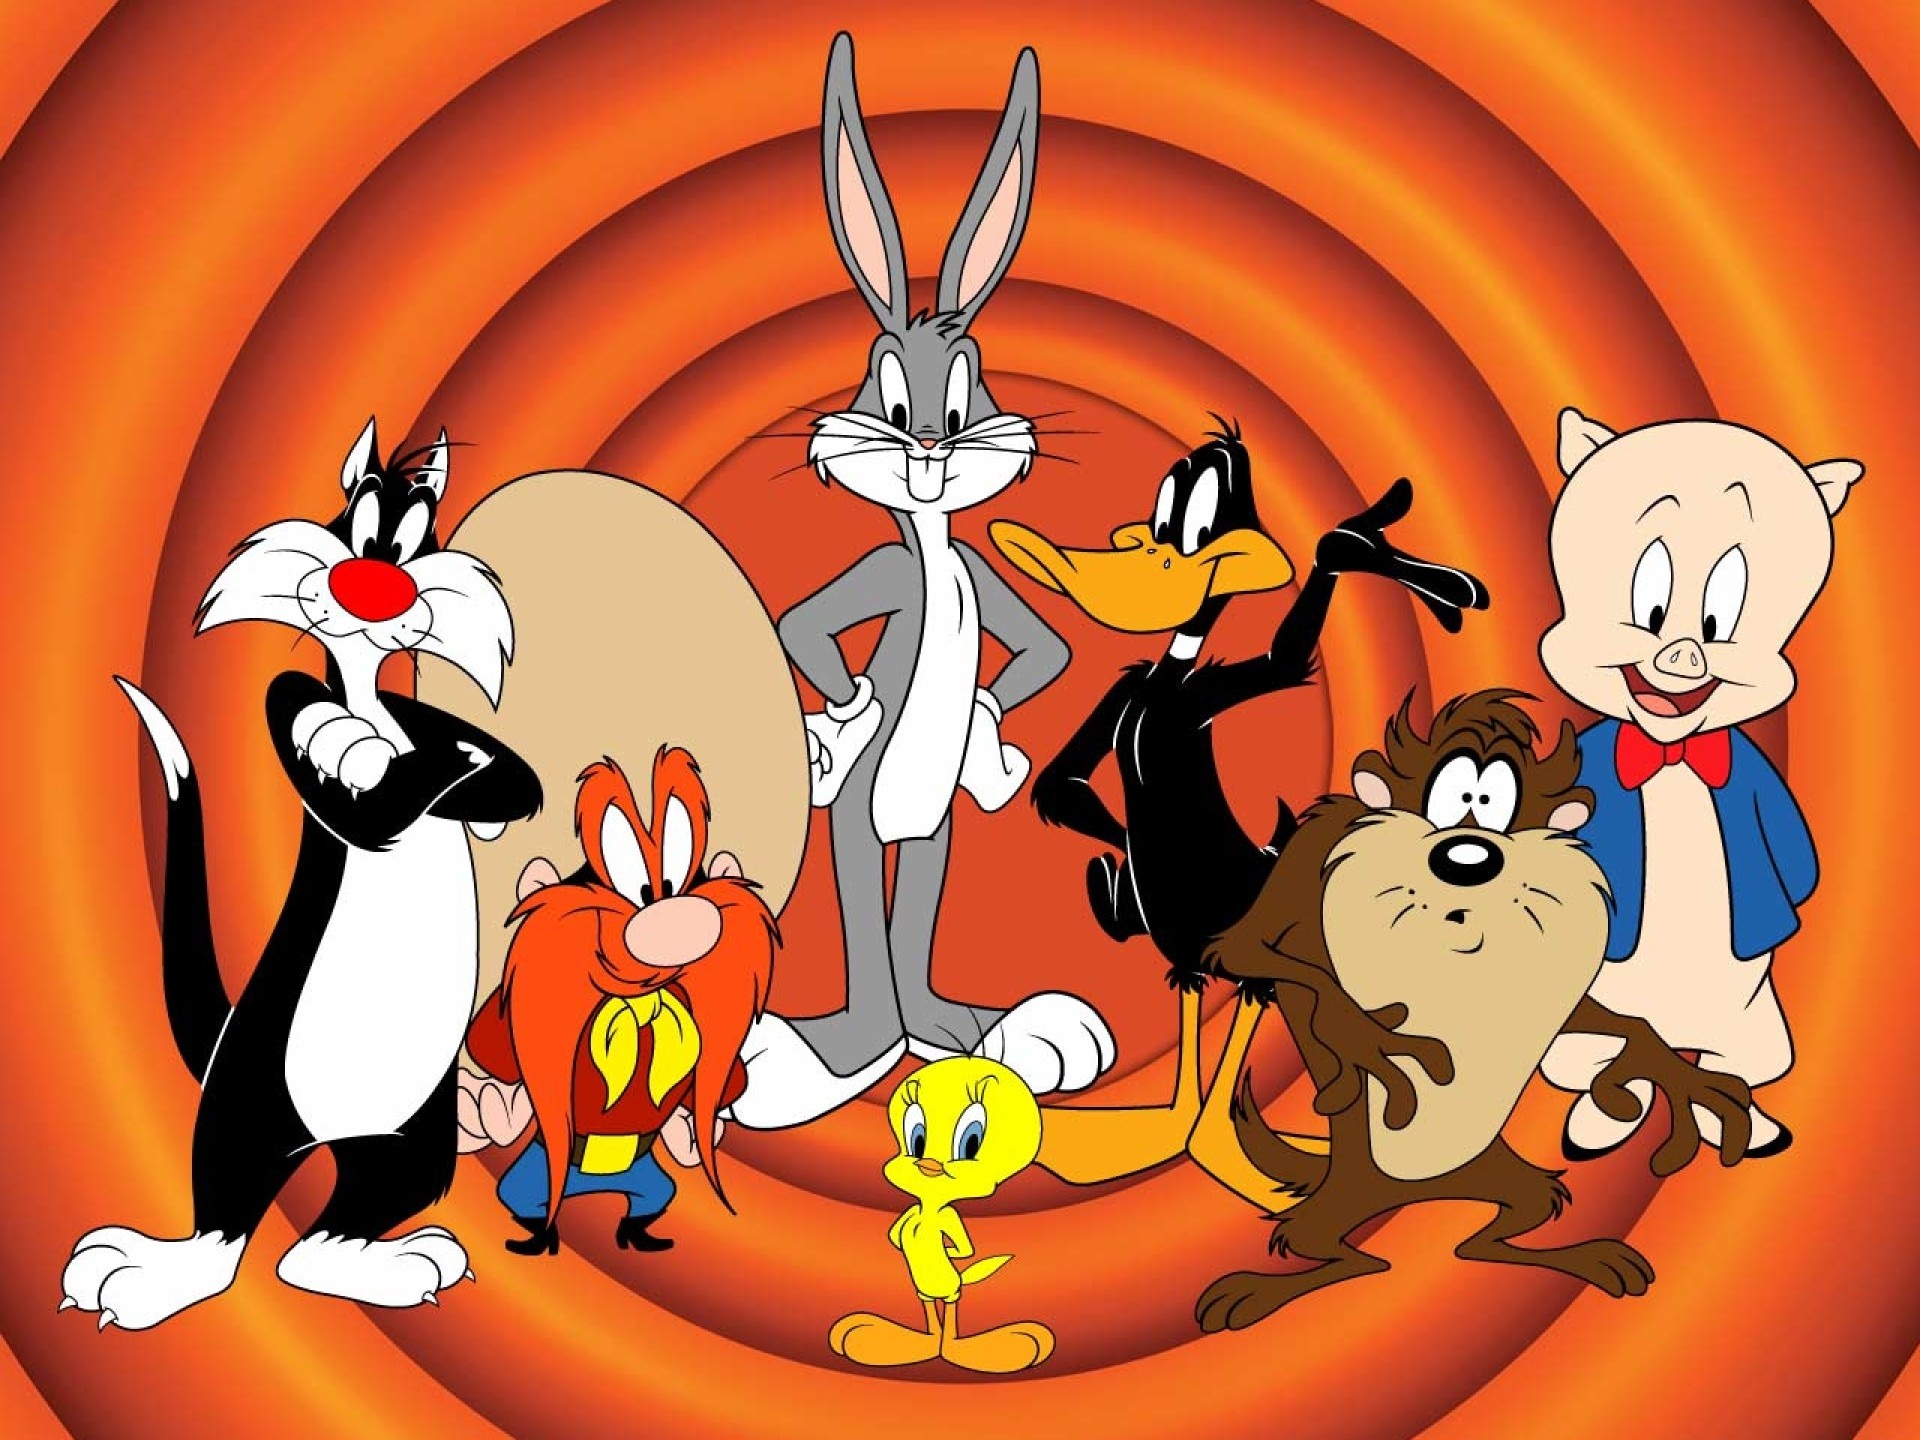 Looney Tunes, Cartoon characters, Colorful wallpapers, Animated series, 1920x1440 HD Desktop